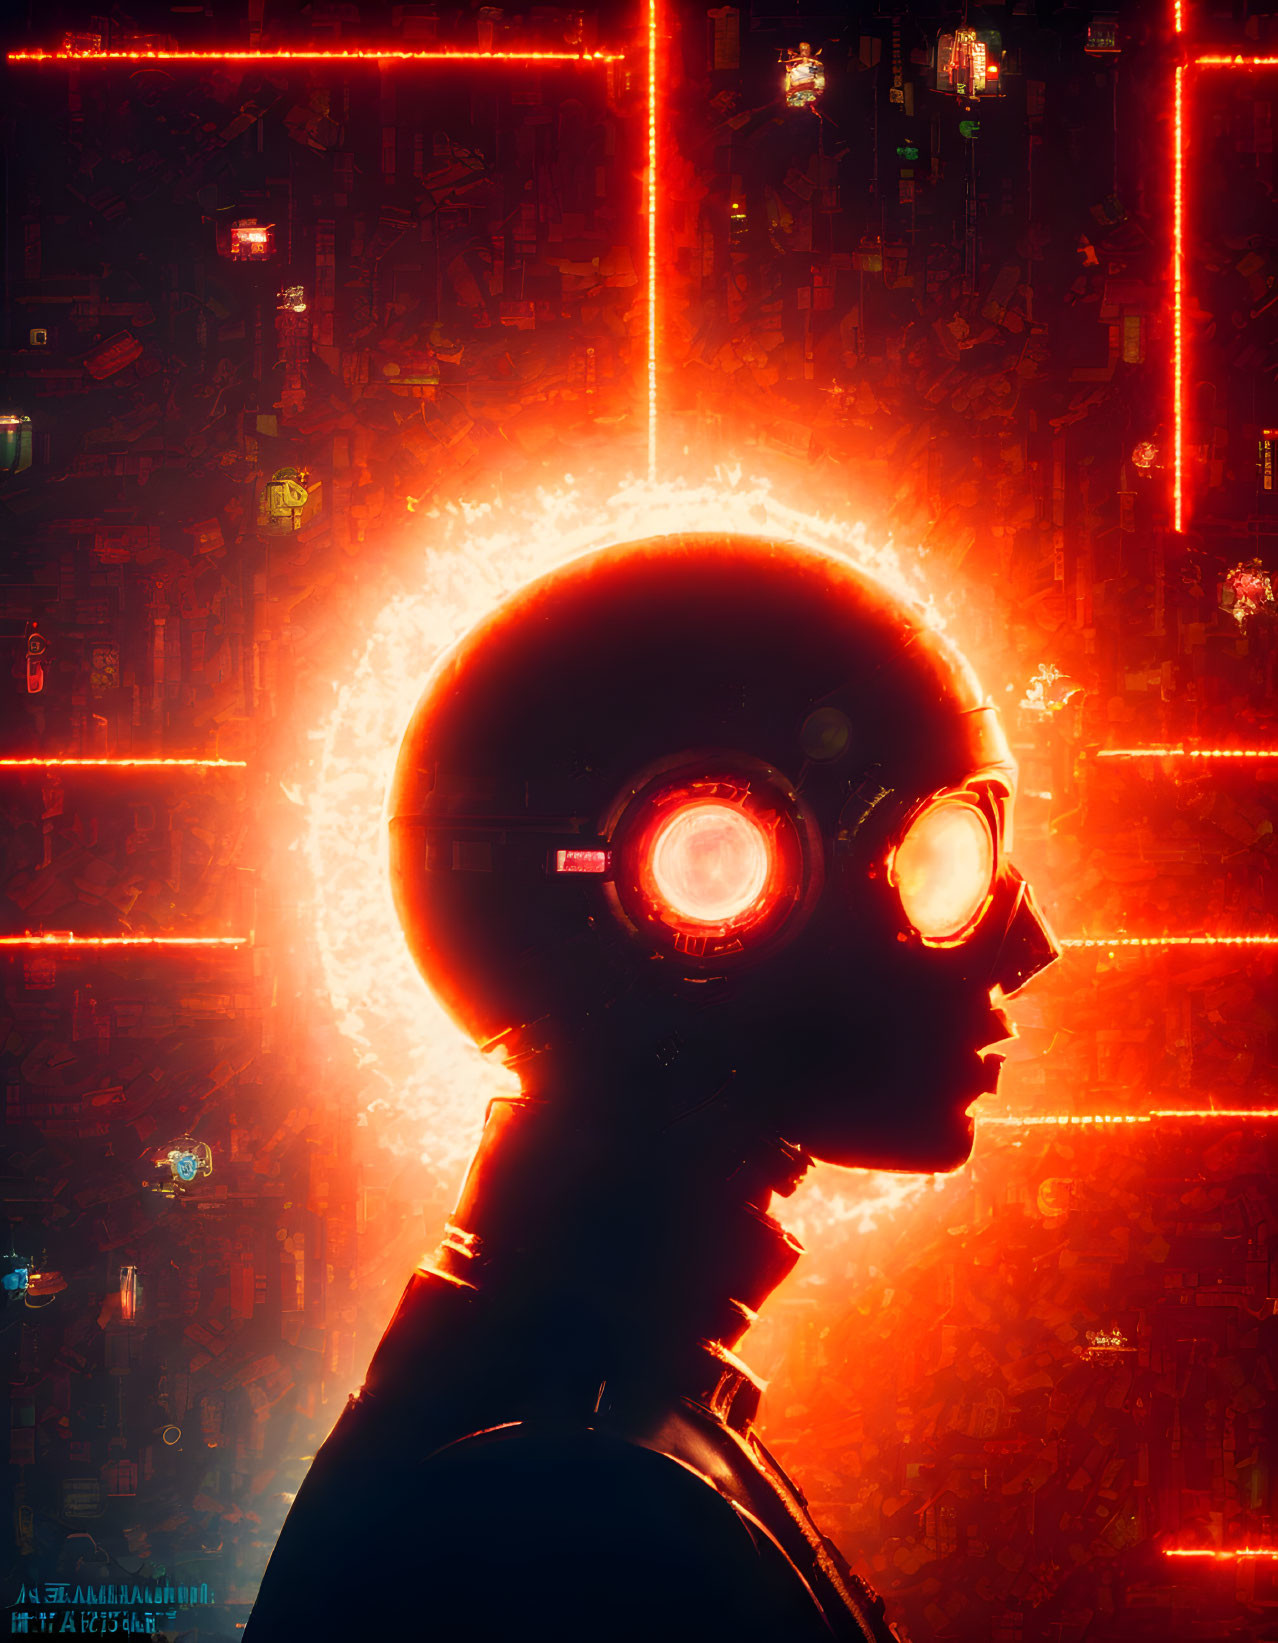 Silhouette of Person with Glowing Goggles in Cyberpunk Neon Scene